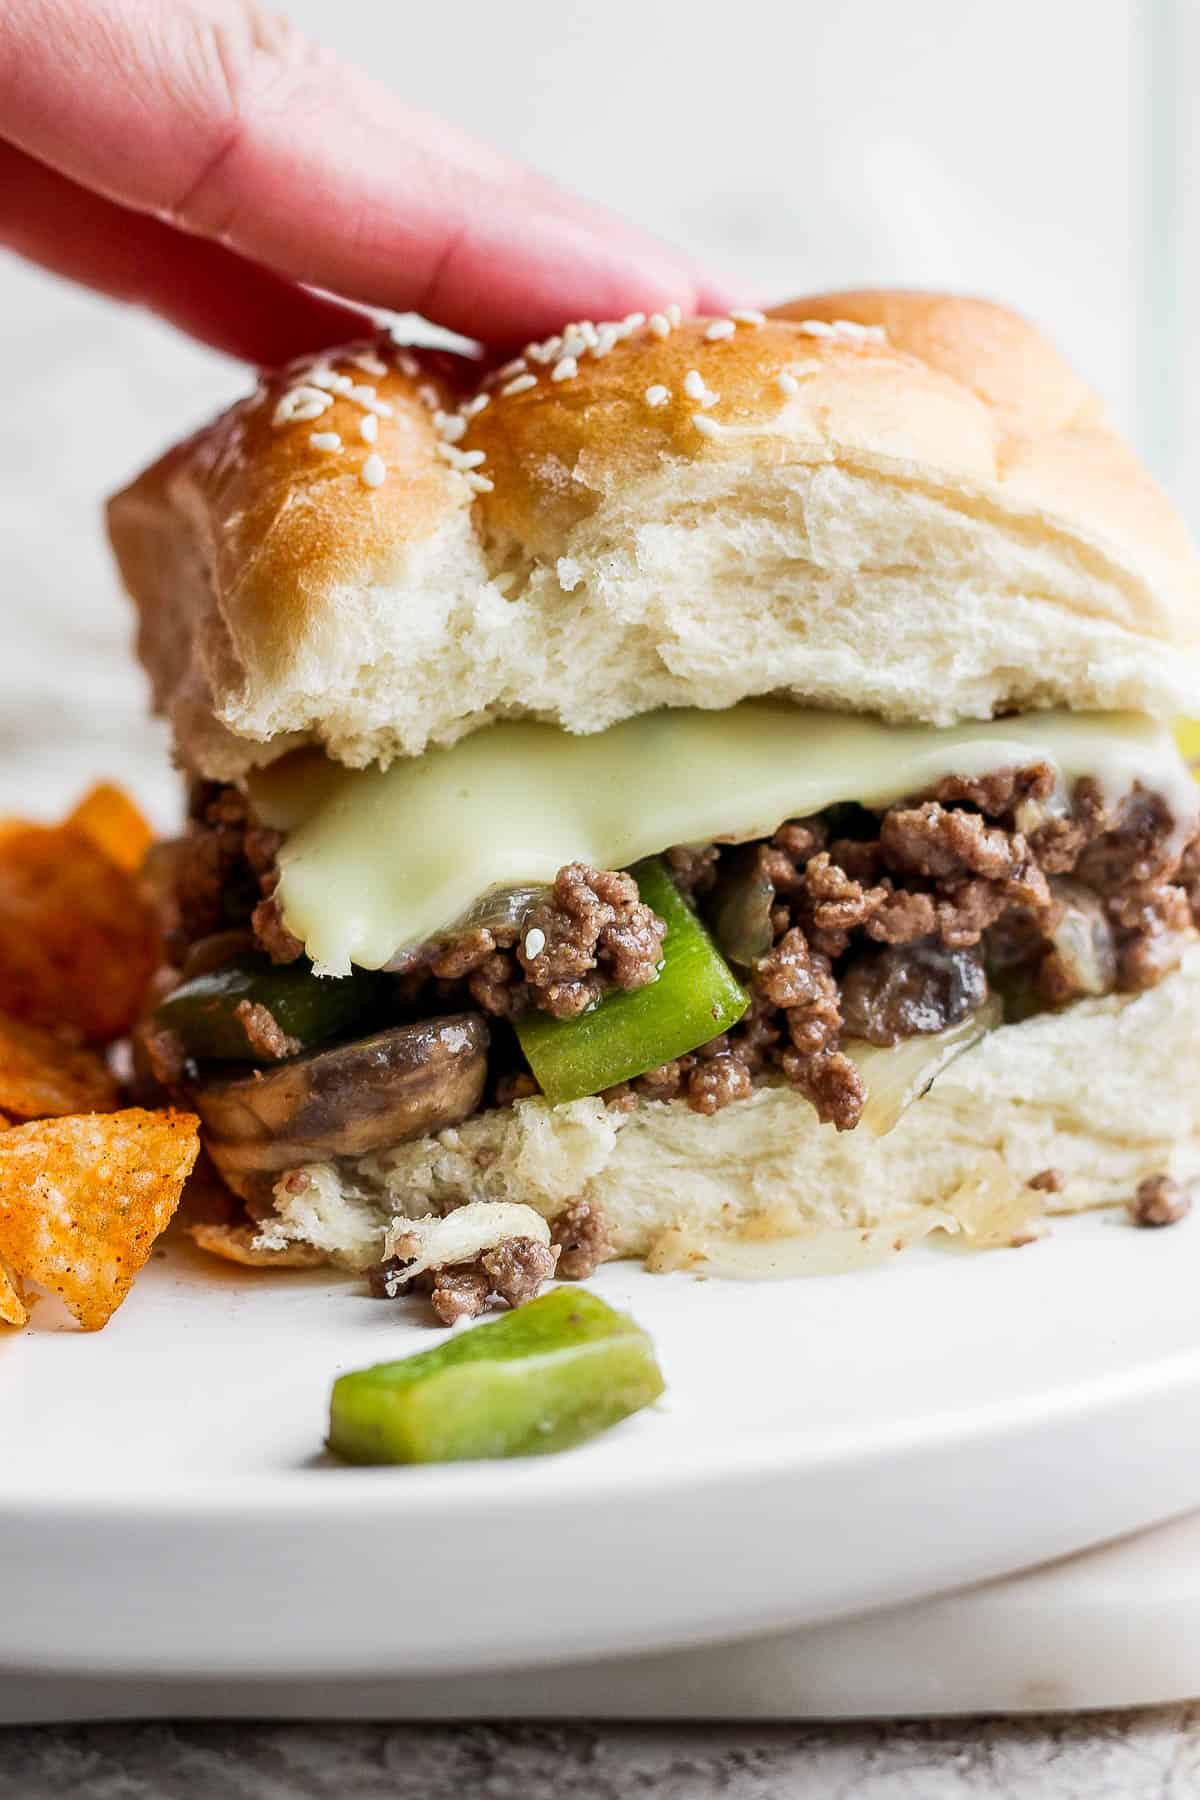 A hand touching the top bun of a philly cheesesteak sloppy joe.